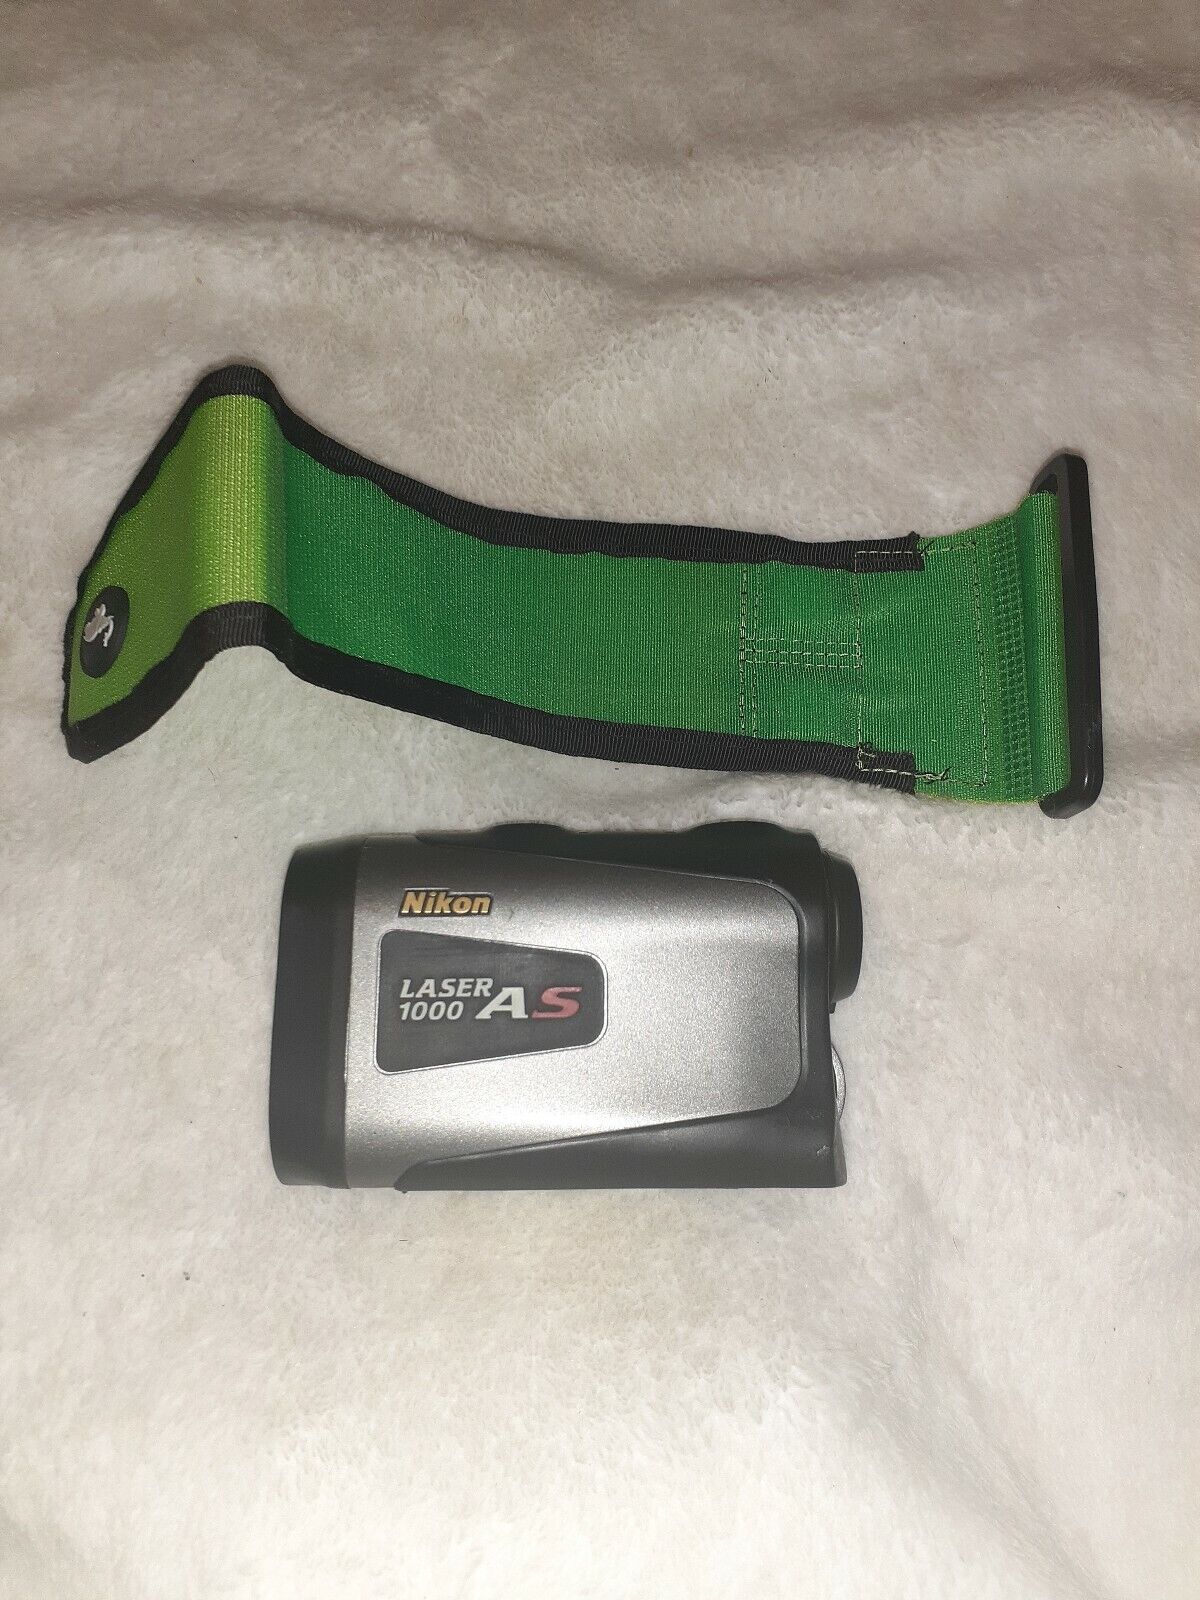 Nikon Wx034660 Laser 1000As Body with green stick it wrap. Missing battery cover